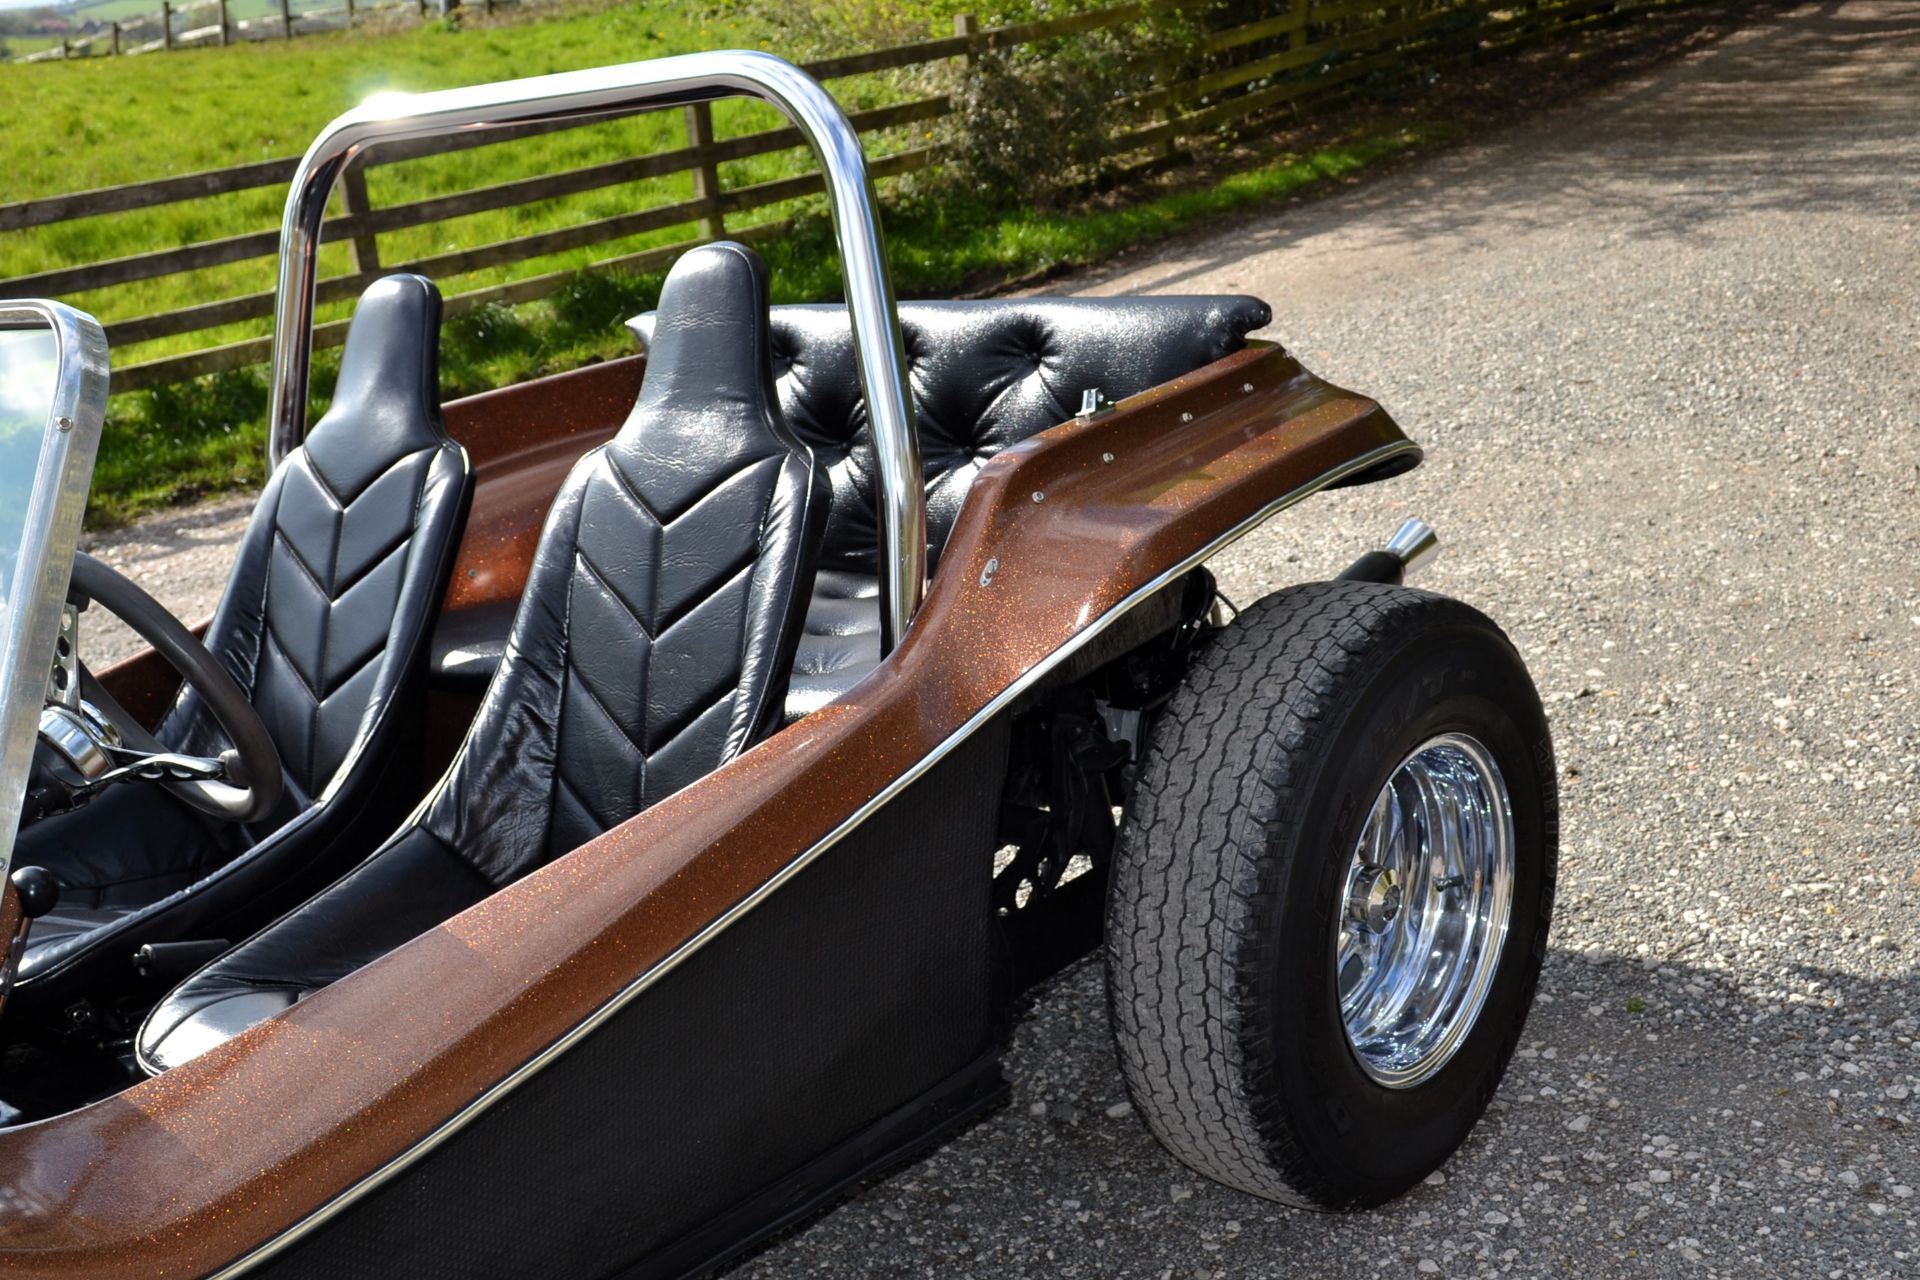 1968 Volkswagen Beach Buggy SWB ‘Meyers Manx Evocation’ No Reserve - Image 10 of 29